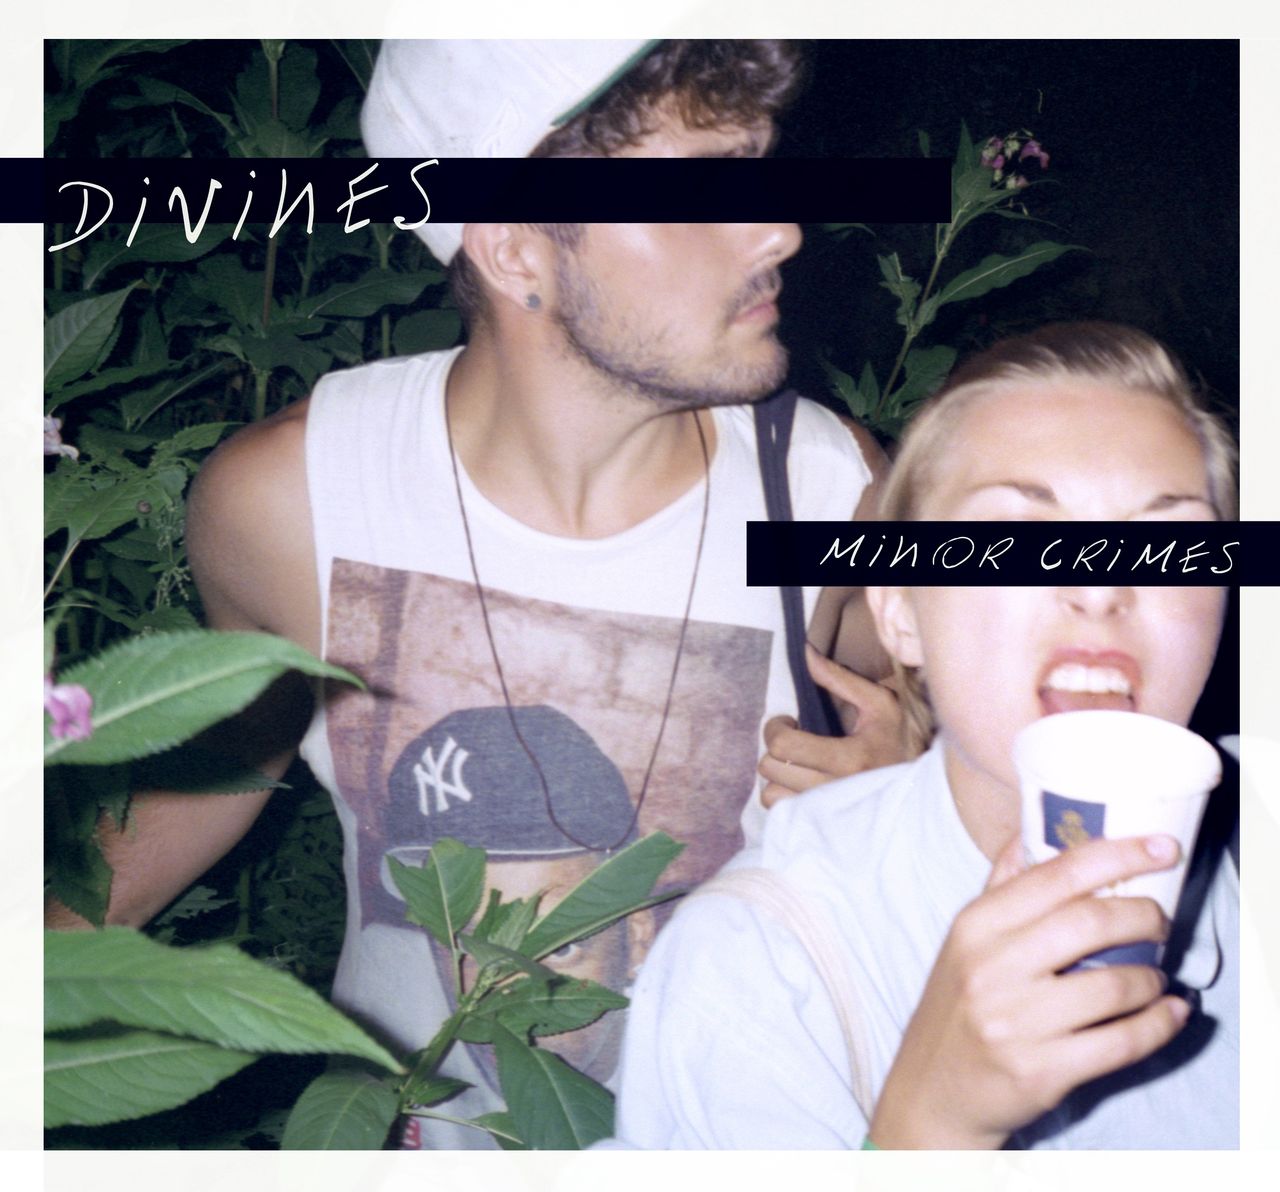 Divines - Warsaw, what you've done to me [WIDEO]